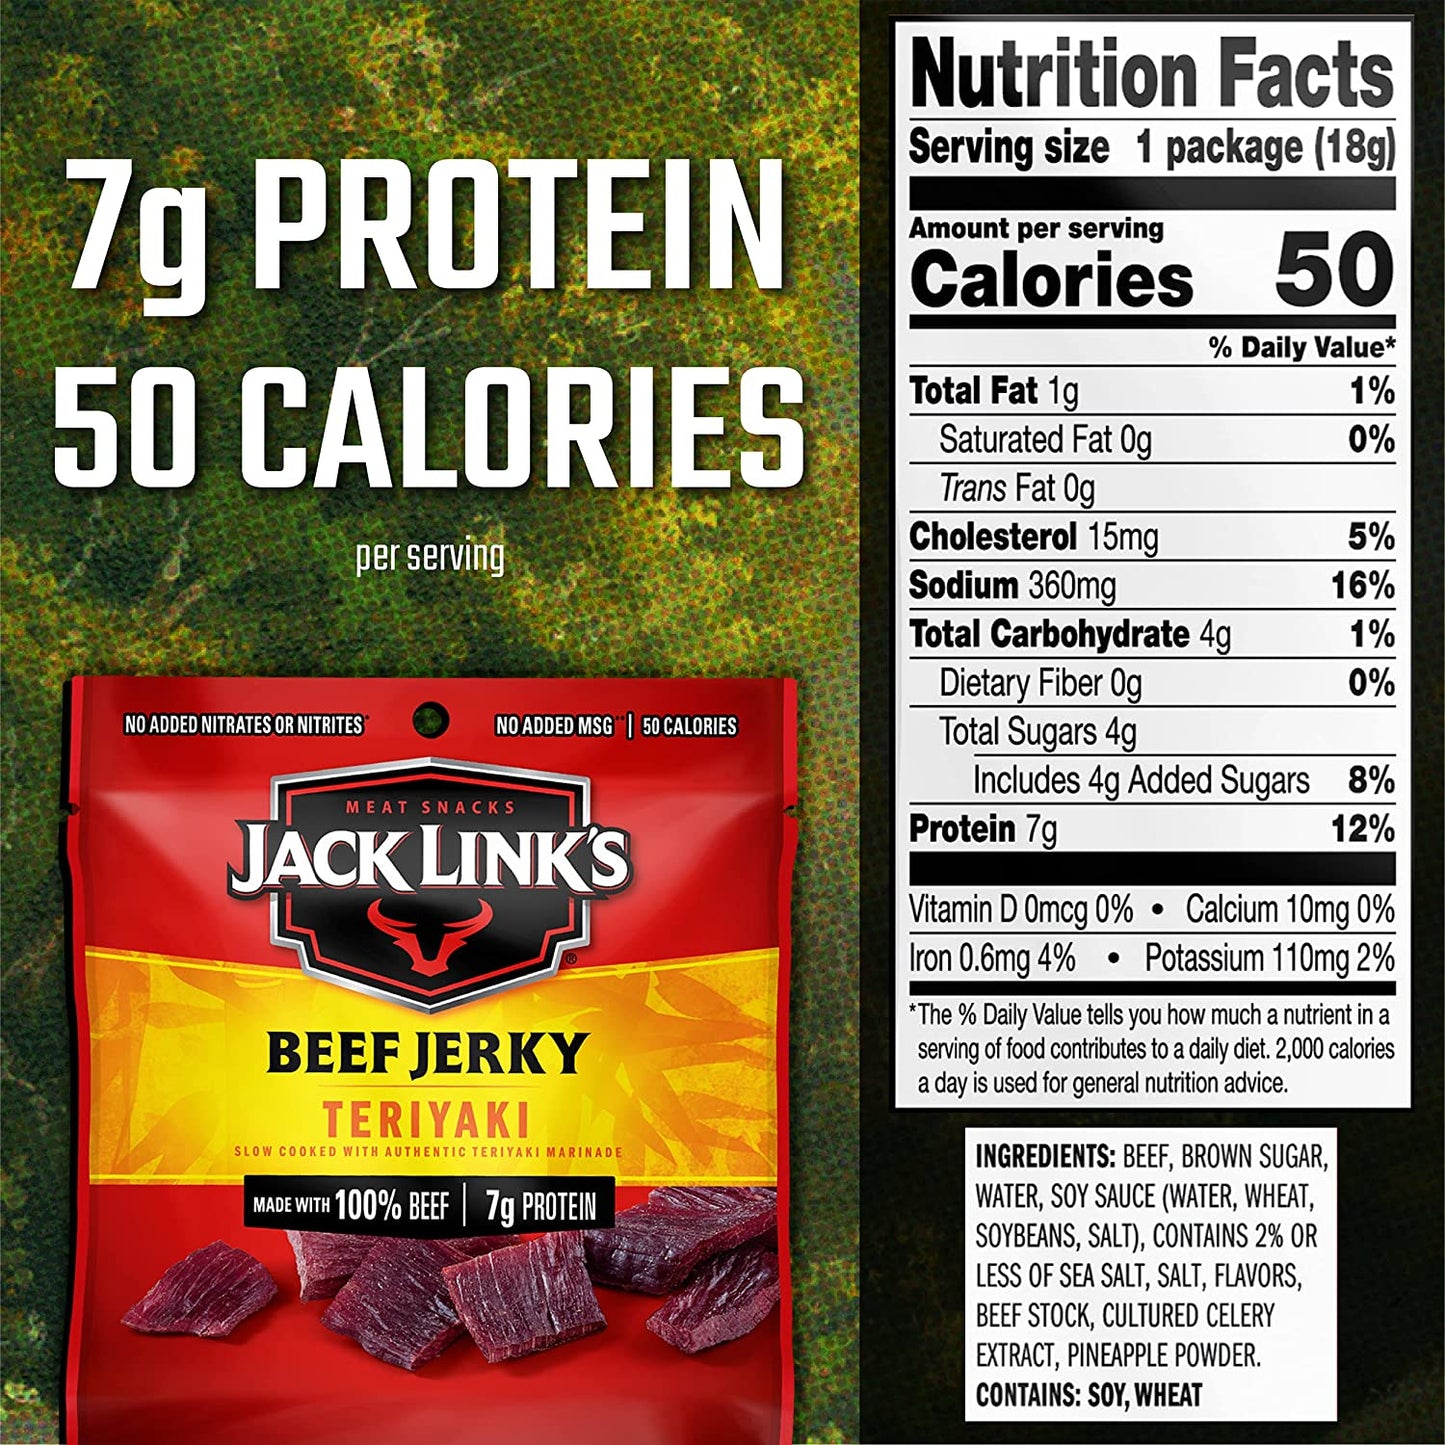 Beef Jerky, Teriyaki - Flavorful Meat Snack for Lunches, Ready to Eat Snacks - 7G of Protein, Made with Premium Beef - 0.625 Oz Bags (Pack of 5)